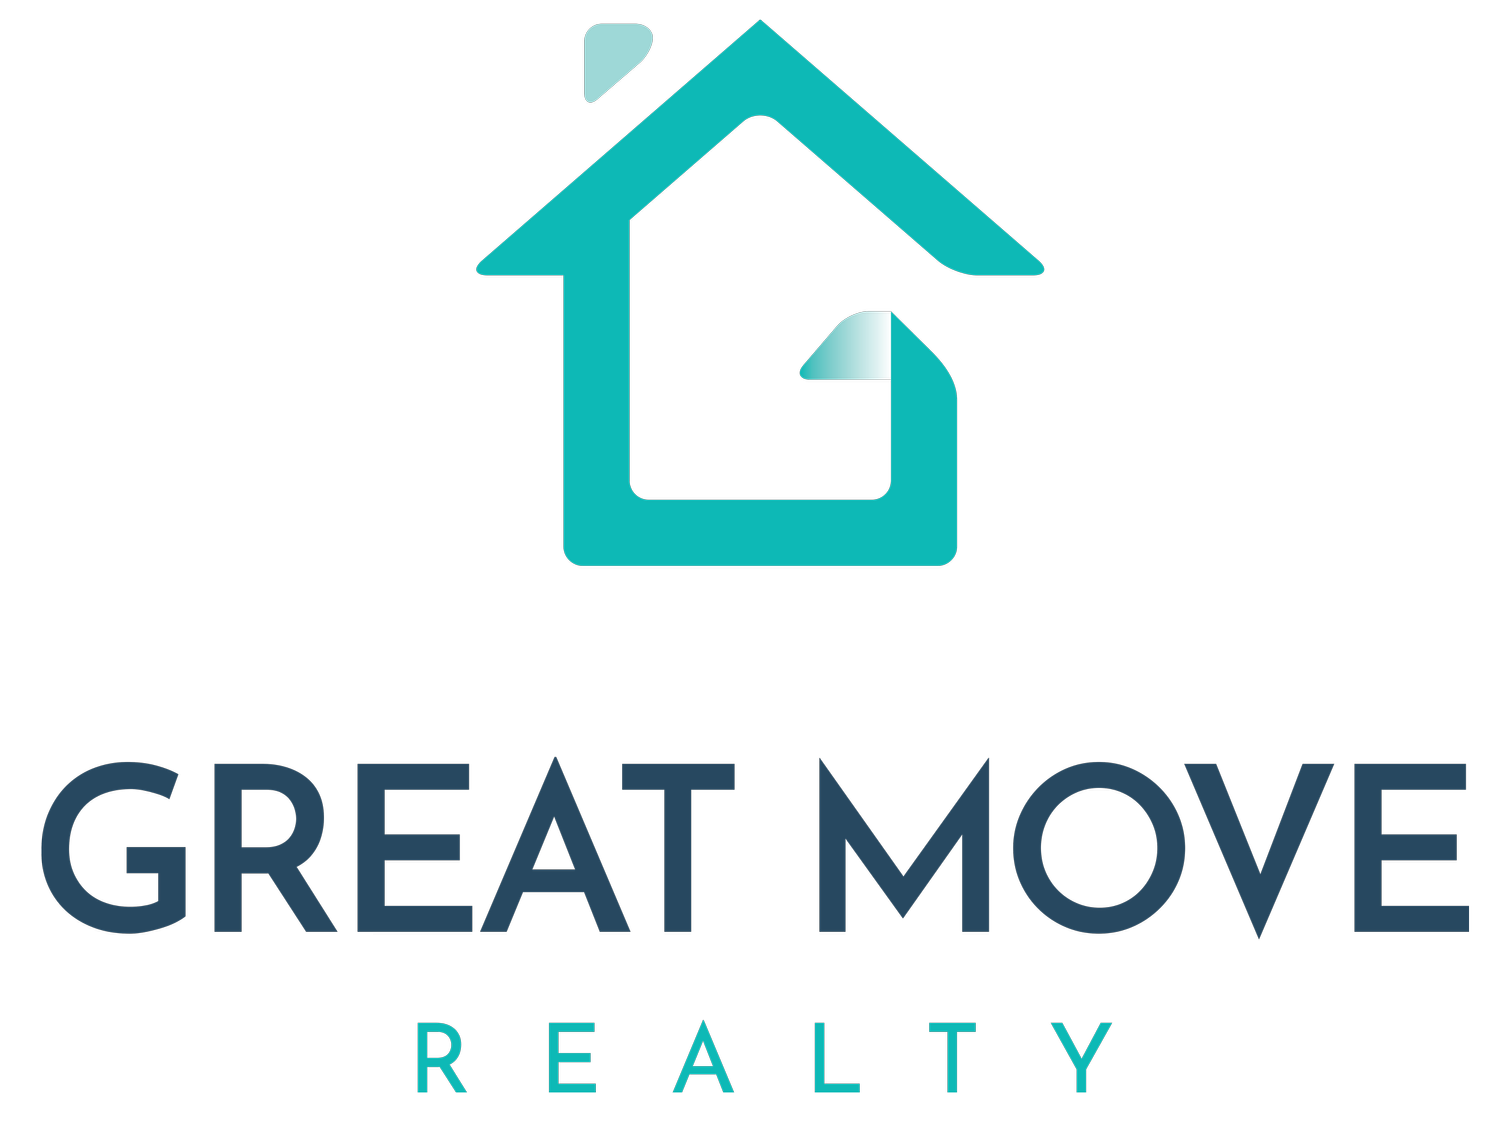 Great Move Realty